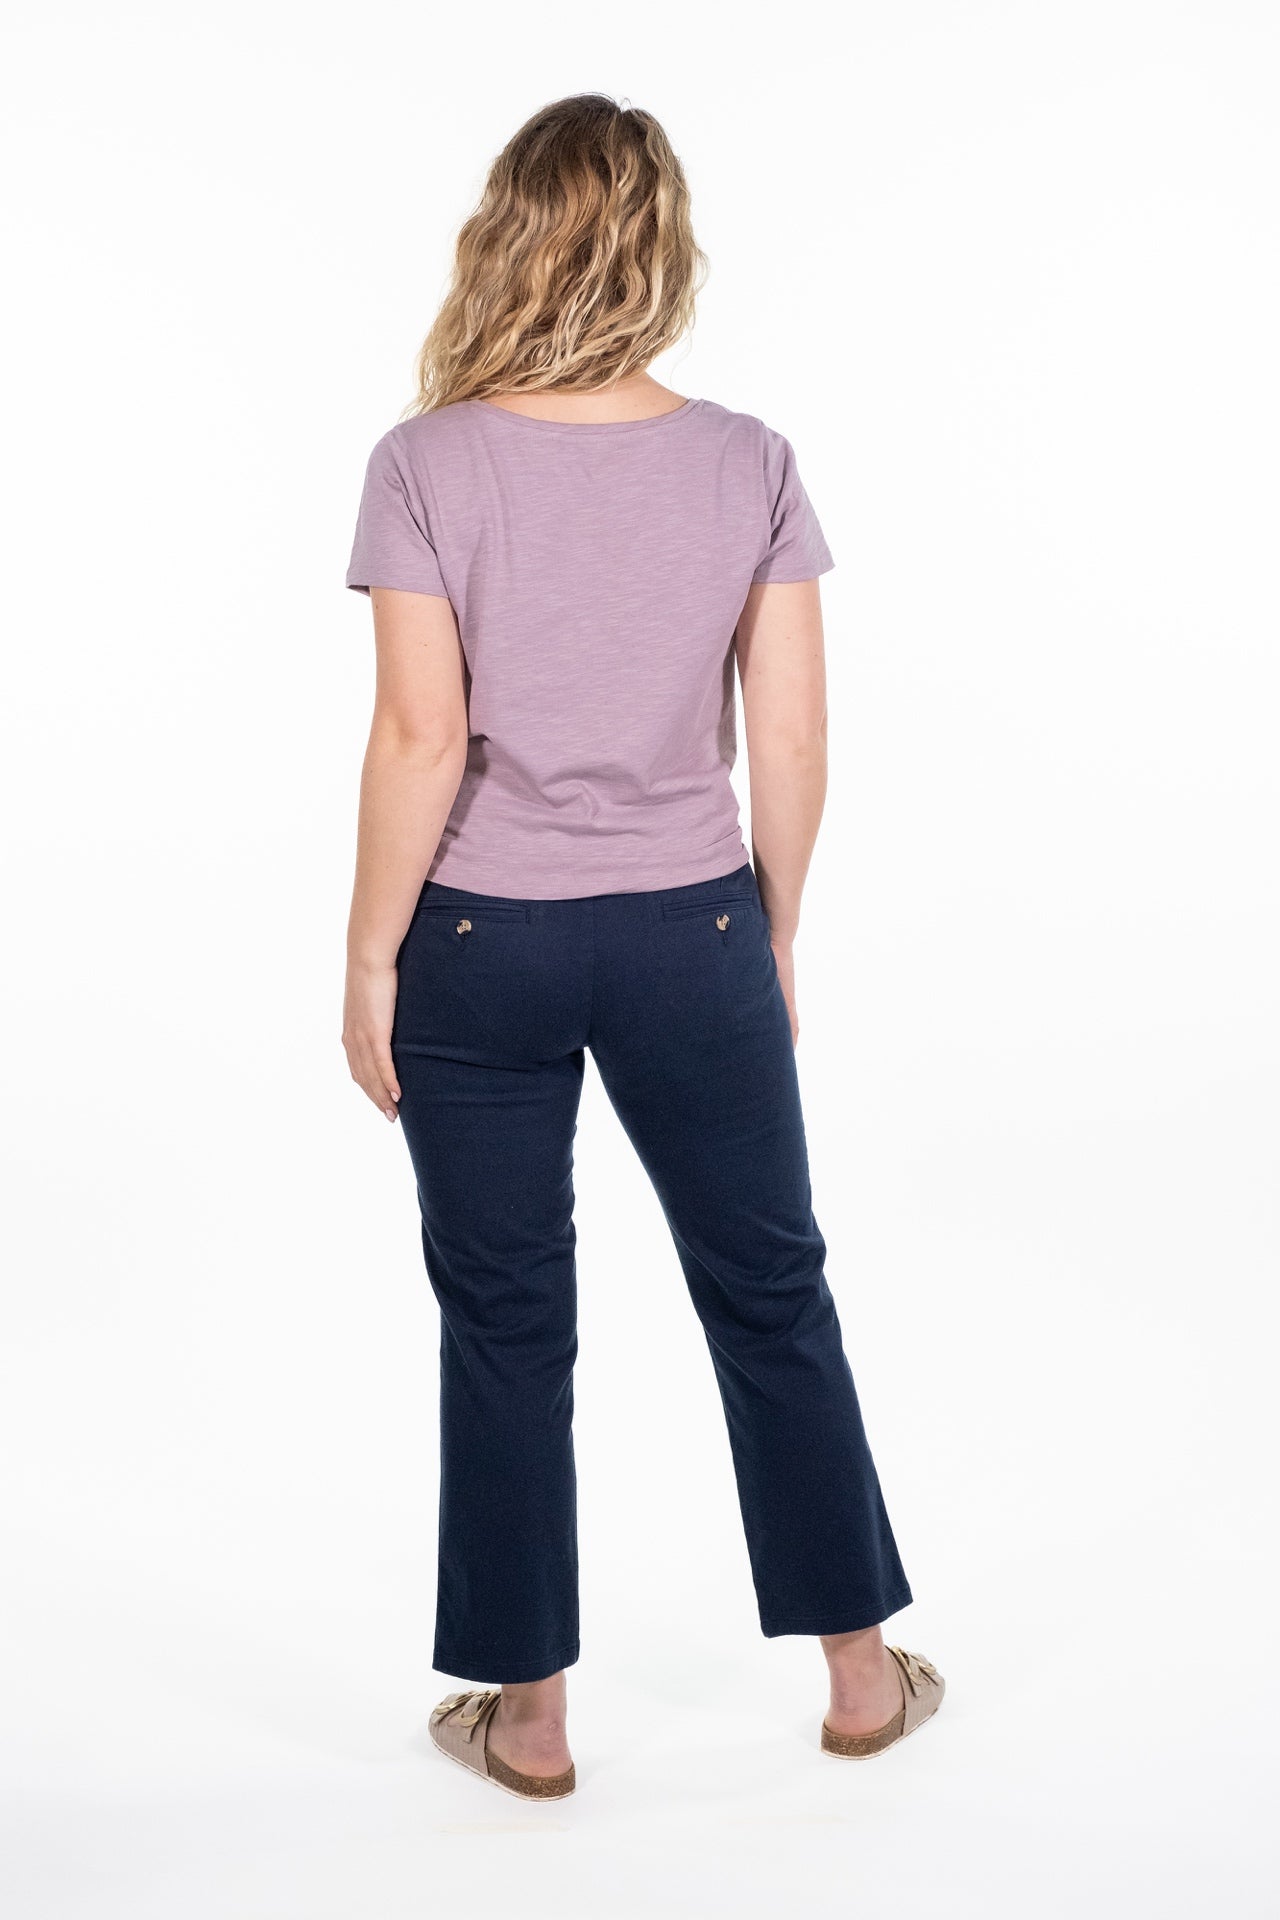 Kim Navy Cropped Chino Pant - Rupert and Buckley - Trousers